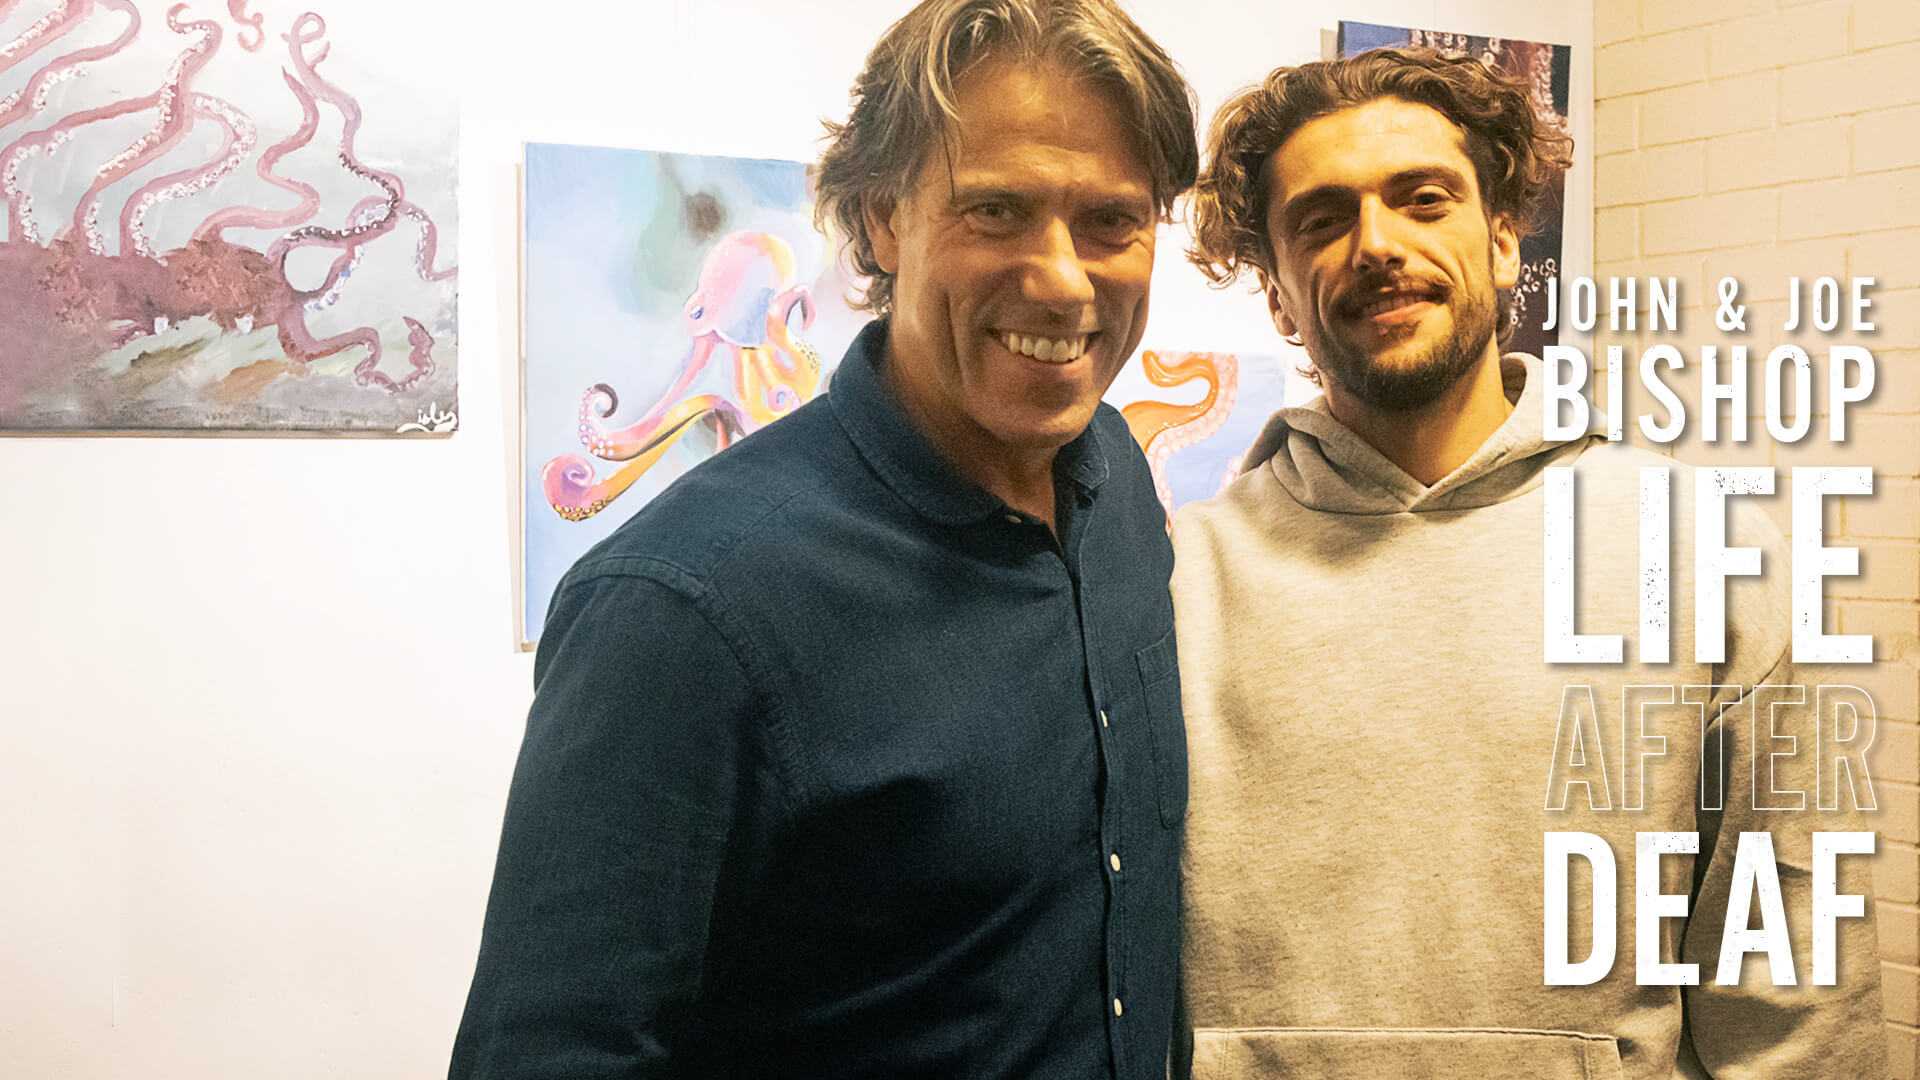 A middle-aged man with a blue jean shirt and younger man with a beige hoodie pose side by side with smiles for the camera.